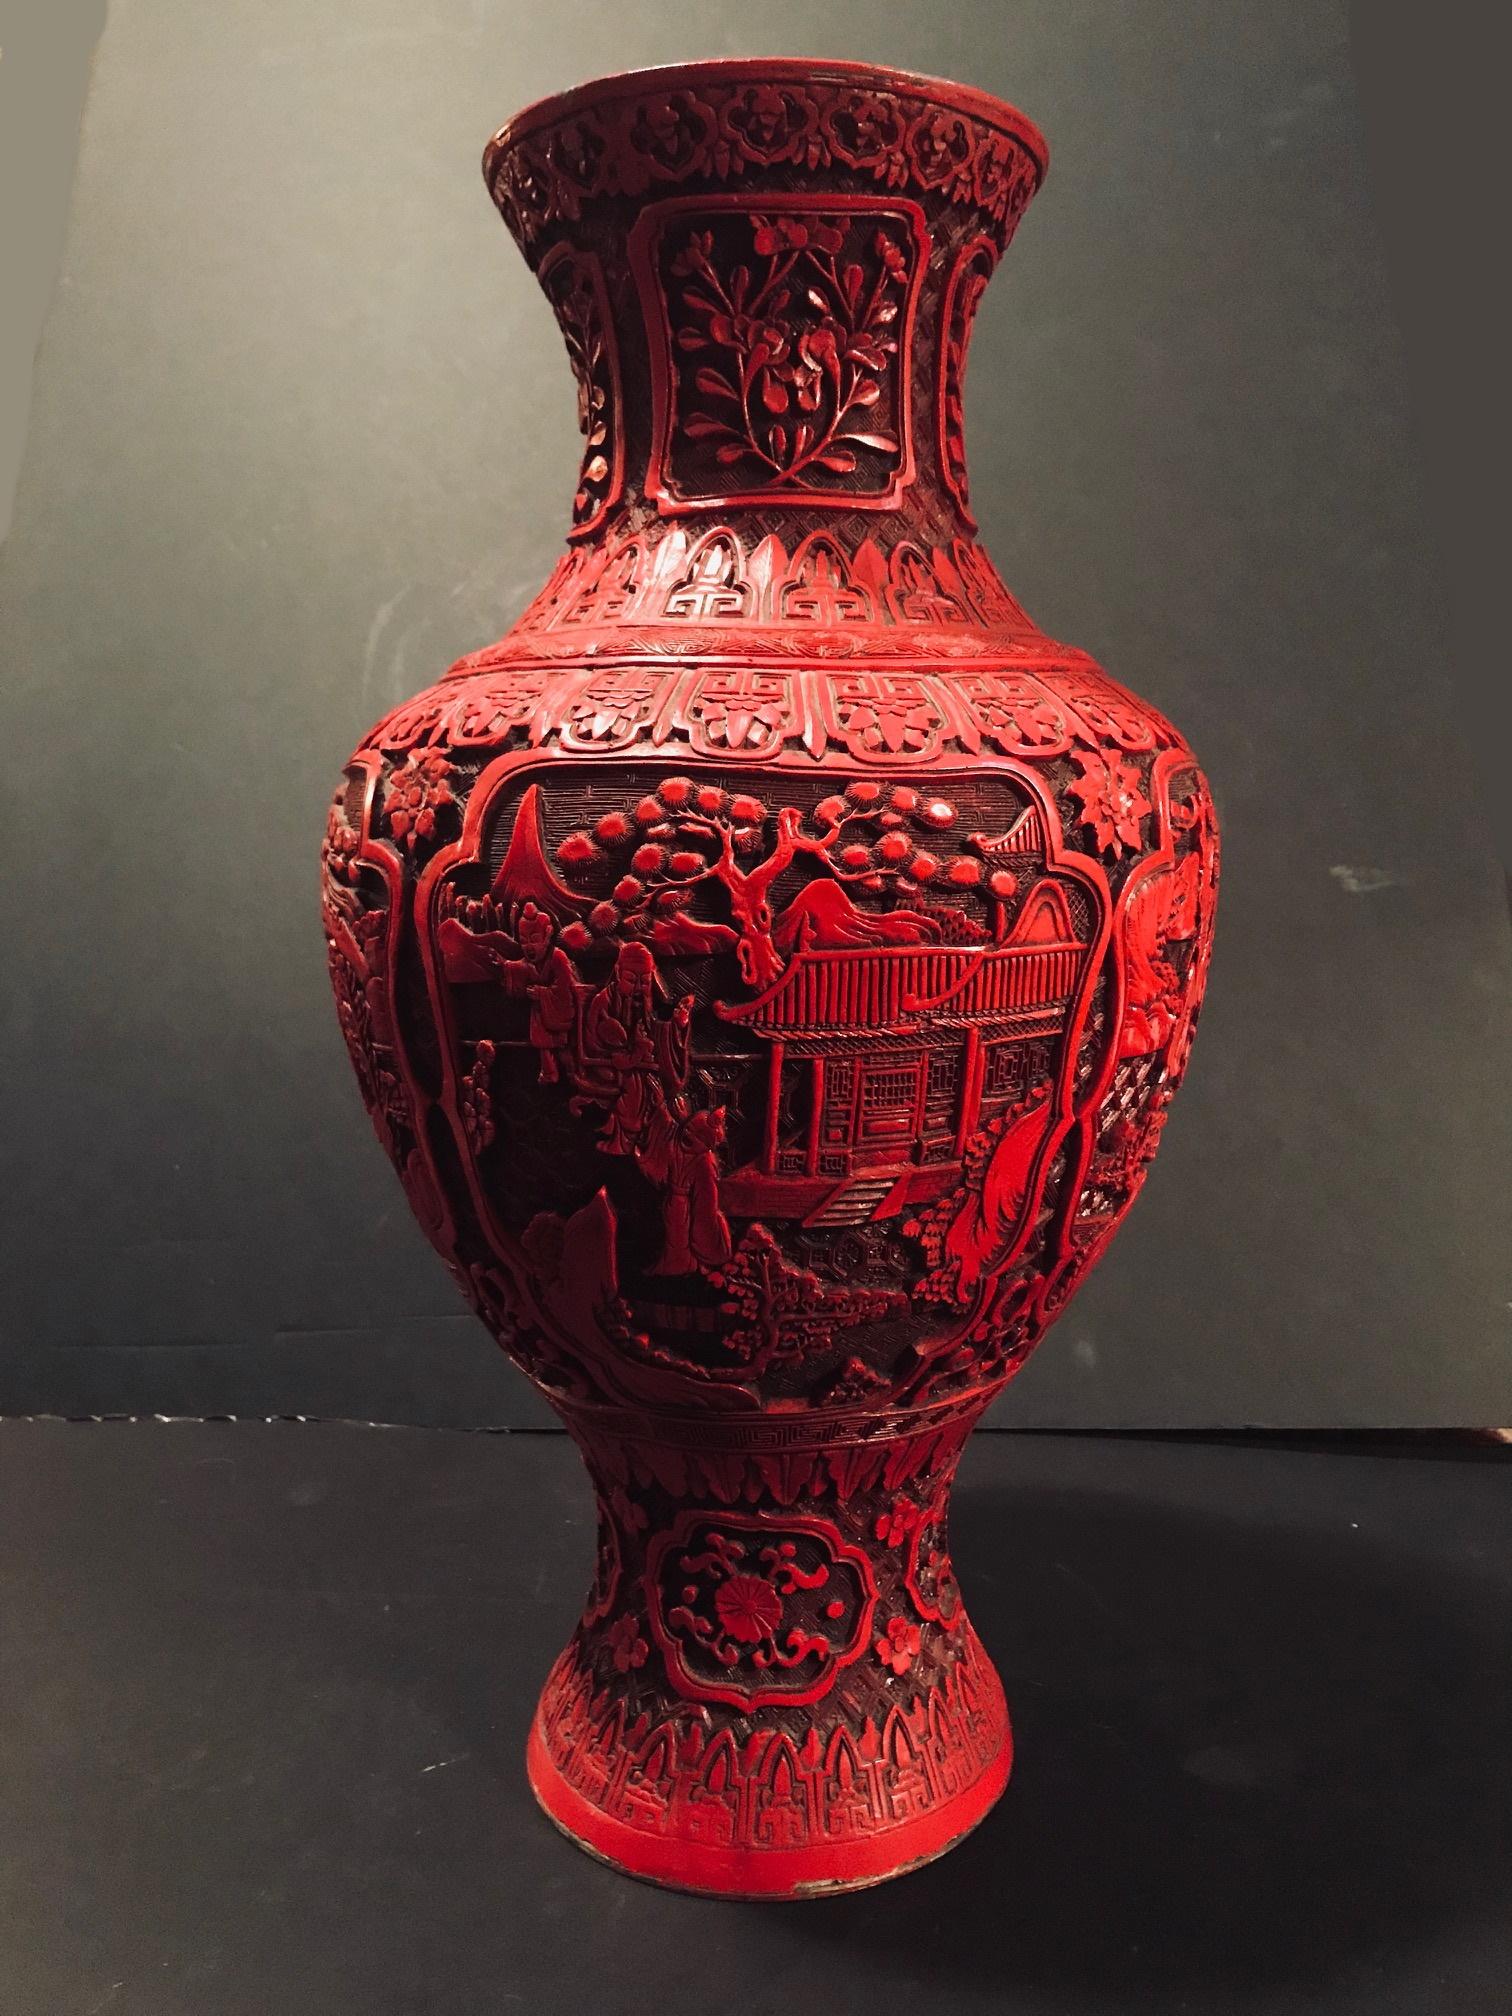 This is a large cinnabar vase of opulent proportions. It is carved in relief with floral decoration on a lattice-work background over a brass baluster form body. There are different motifs in the elaborately carved surface, including full figural